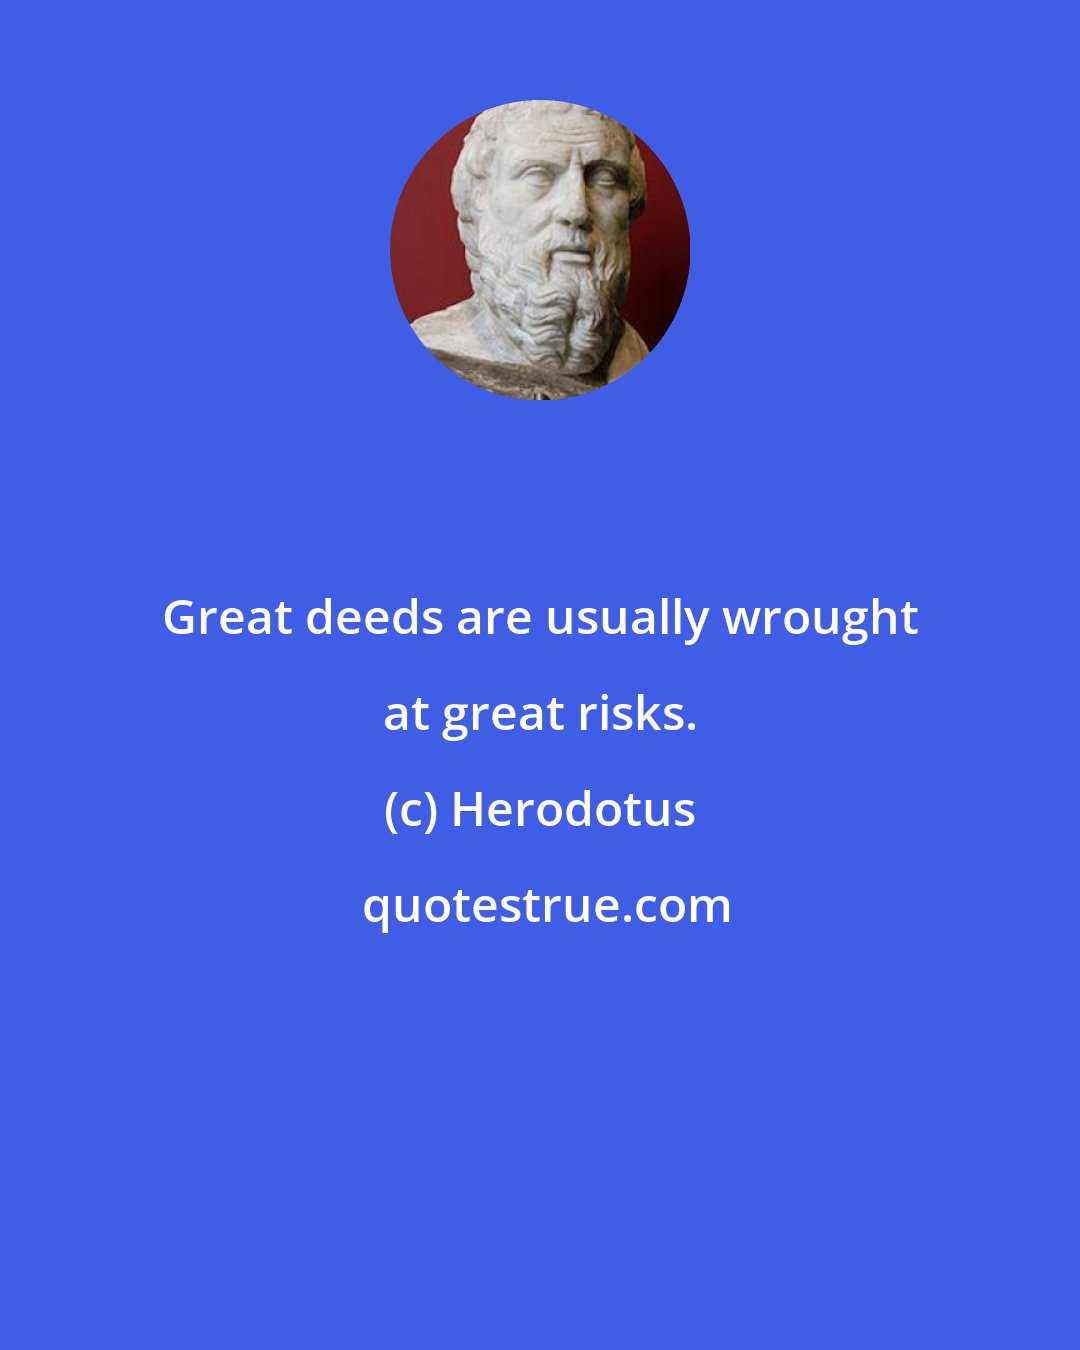 Herodotus: Great deeds are usually wrought at great risks.